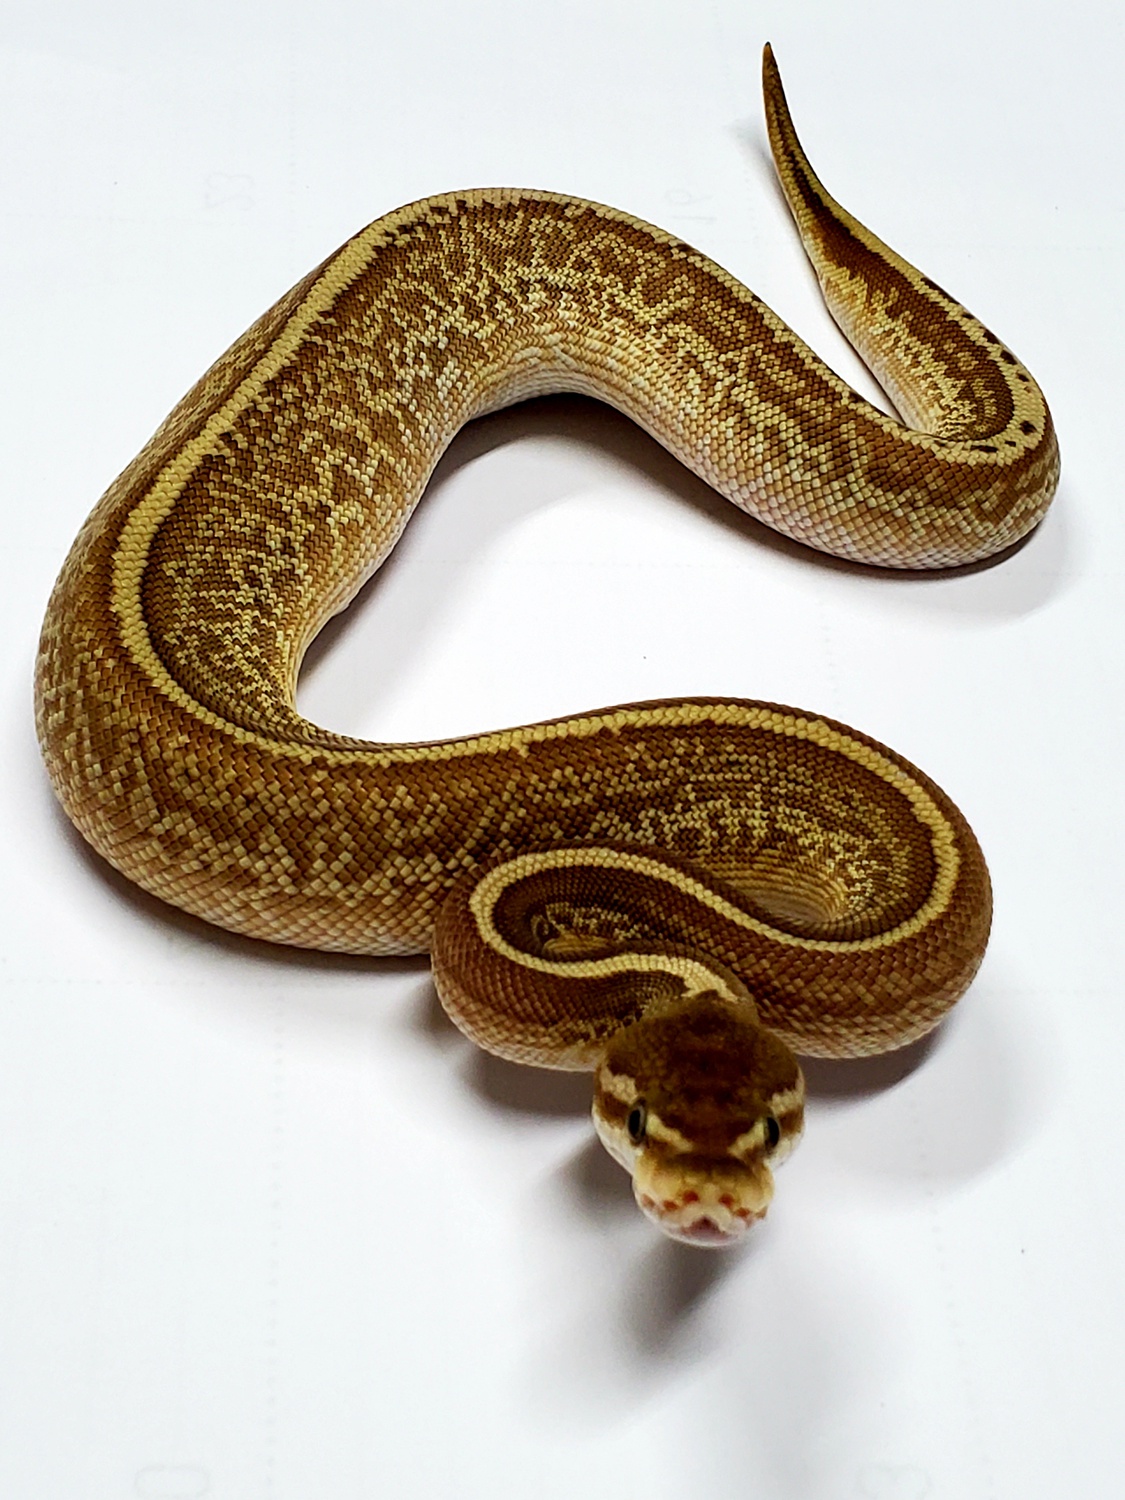 Leopard Butter Sunset 50% Het Pied Ball Python by World Wide Reptiles